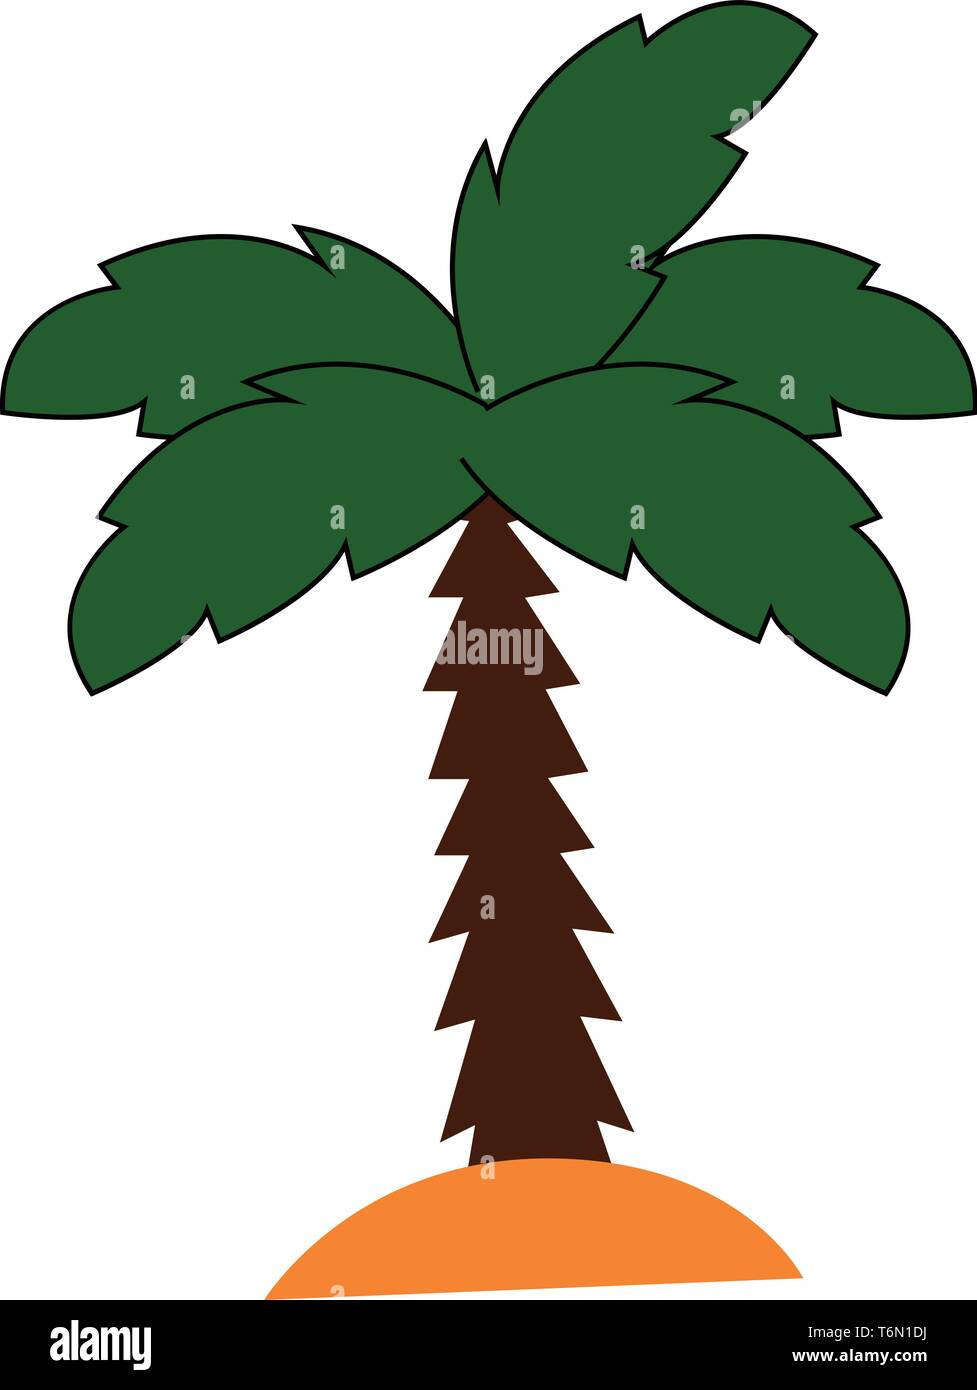 A palm tree having a crown of very long feathered or fan-shaped leaves grows above the land  vector  color drawing or illustration Stock Vector